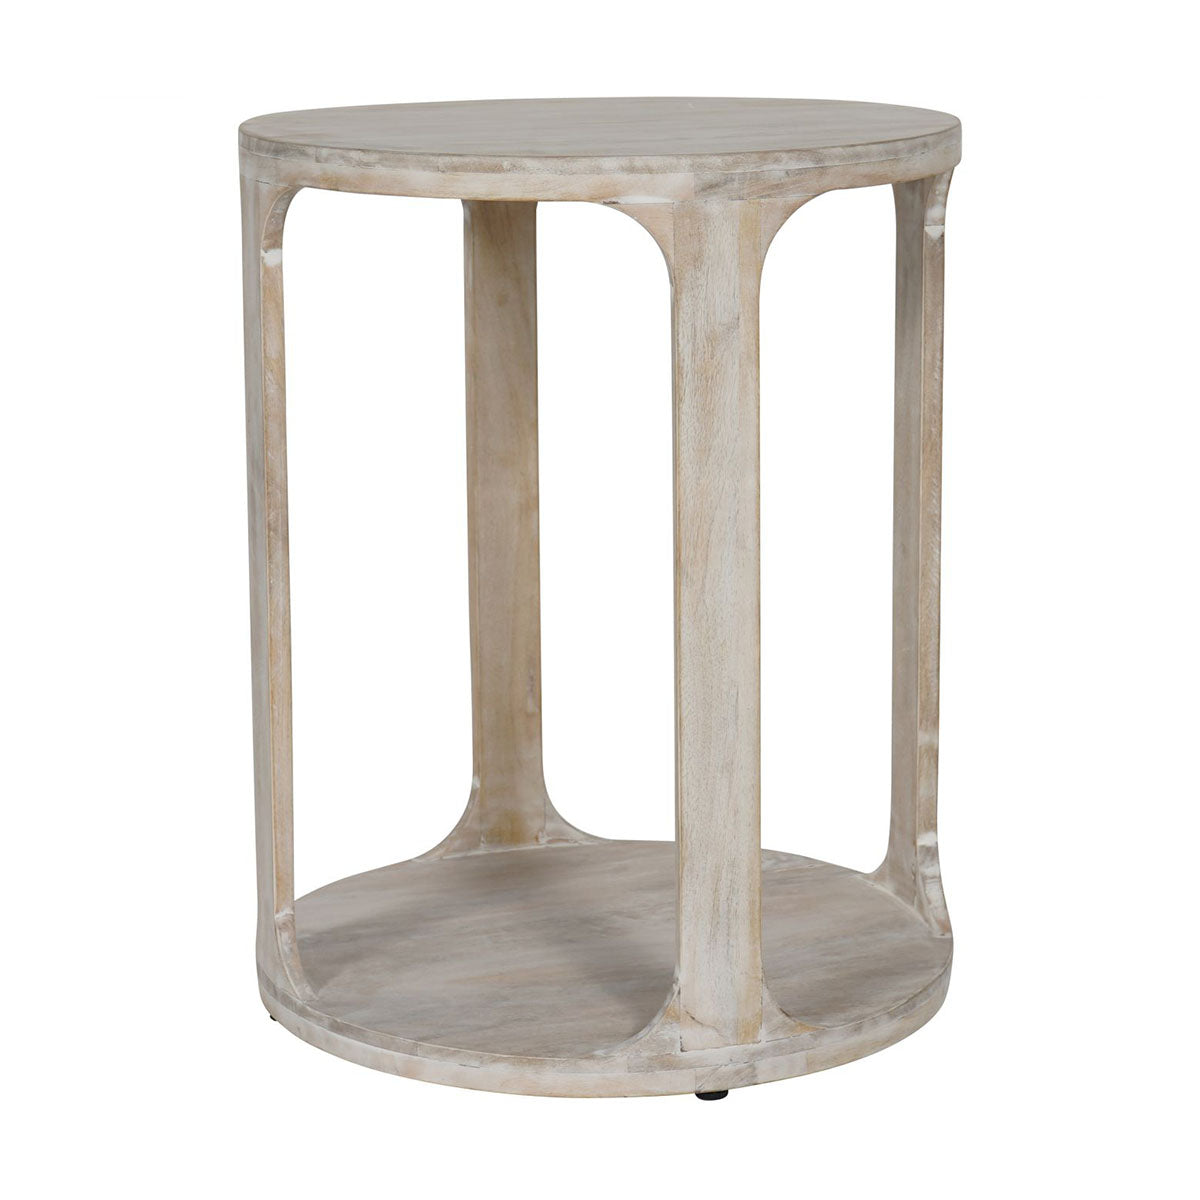 Beadnell Solid Carved Wooden Side Table in Whitewash Finish